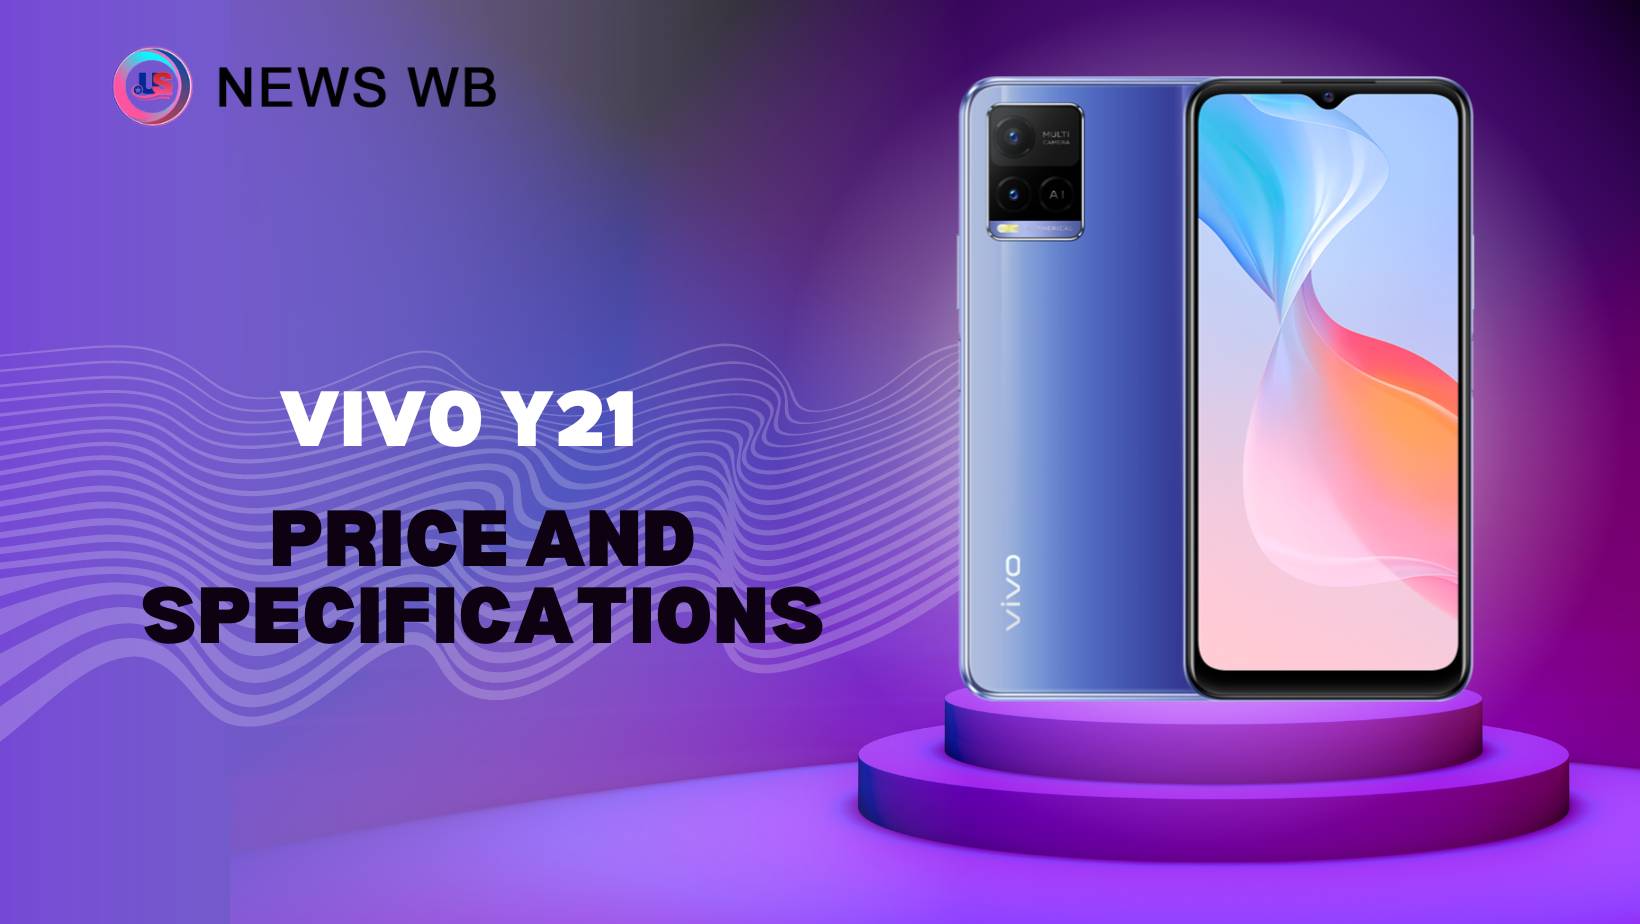 Vivo Y21 Price and Specifications